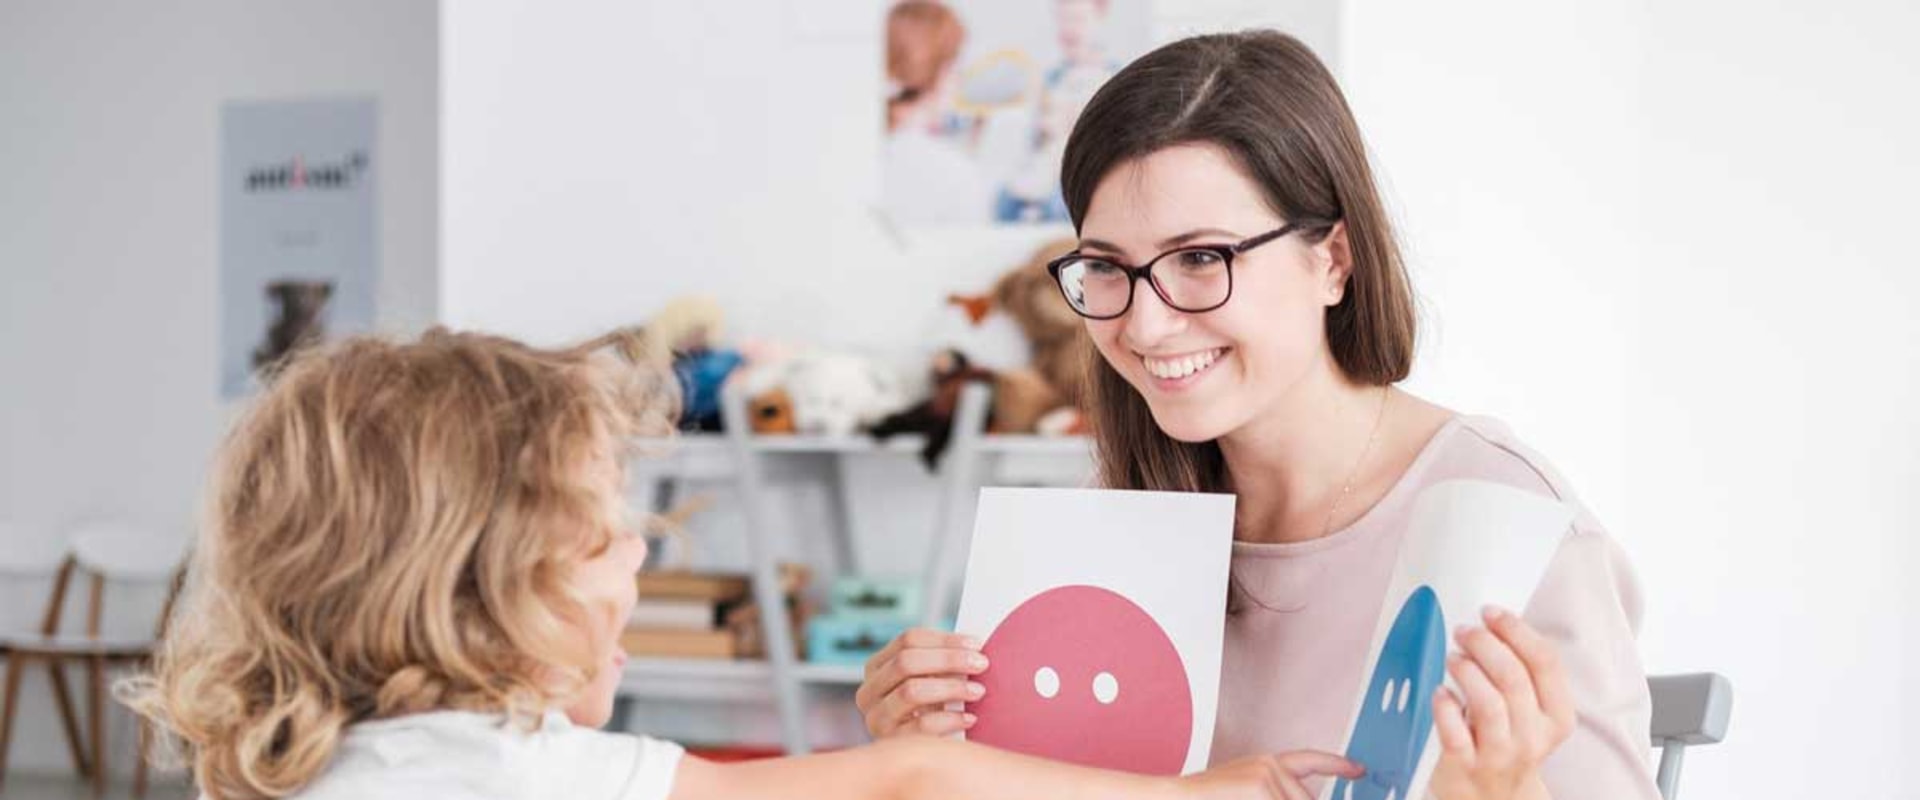 The Benefits of Speech Therapy: What is it Good For?